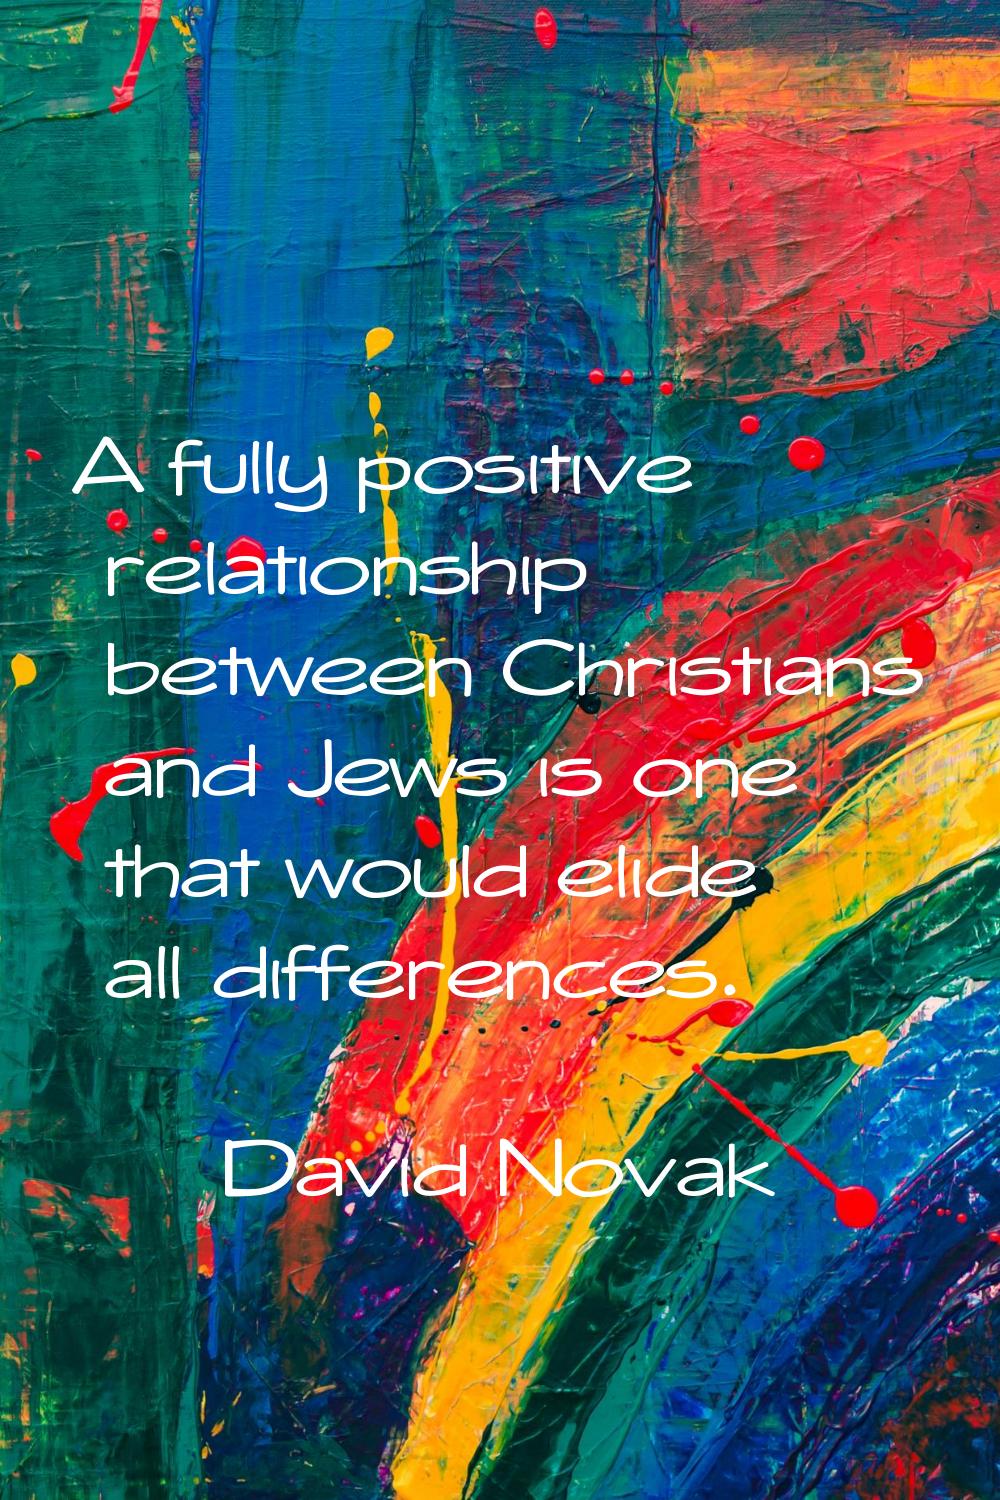 A fully positive relationship between Christians and Jews is one that would elide all differences.